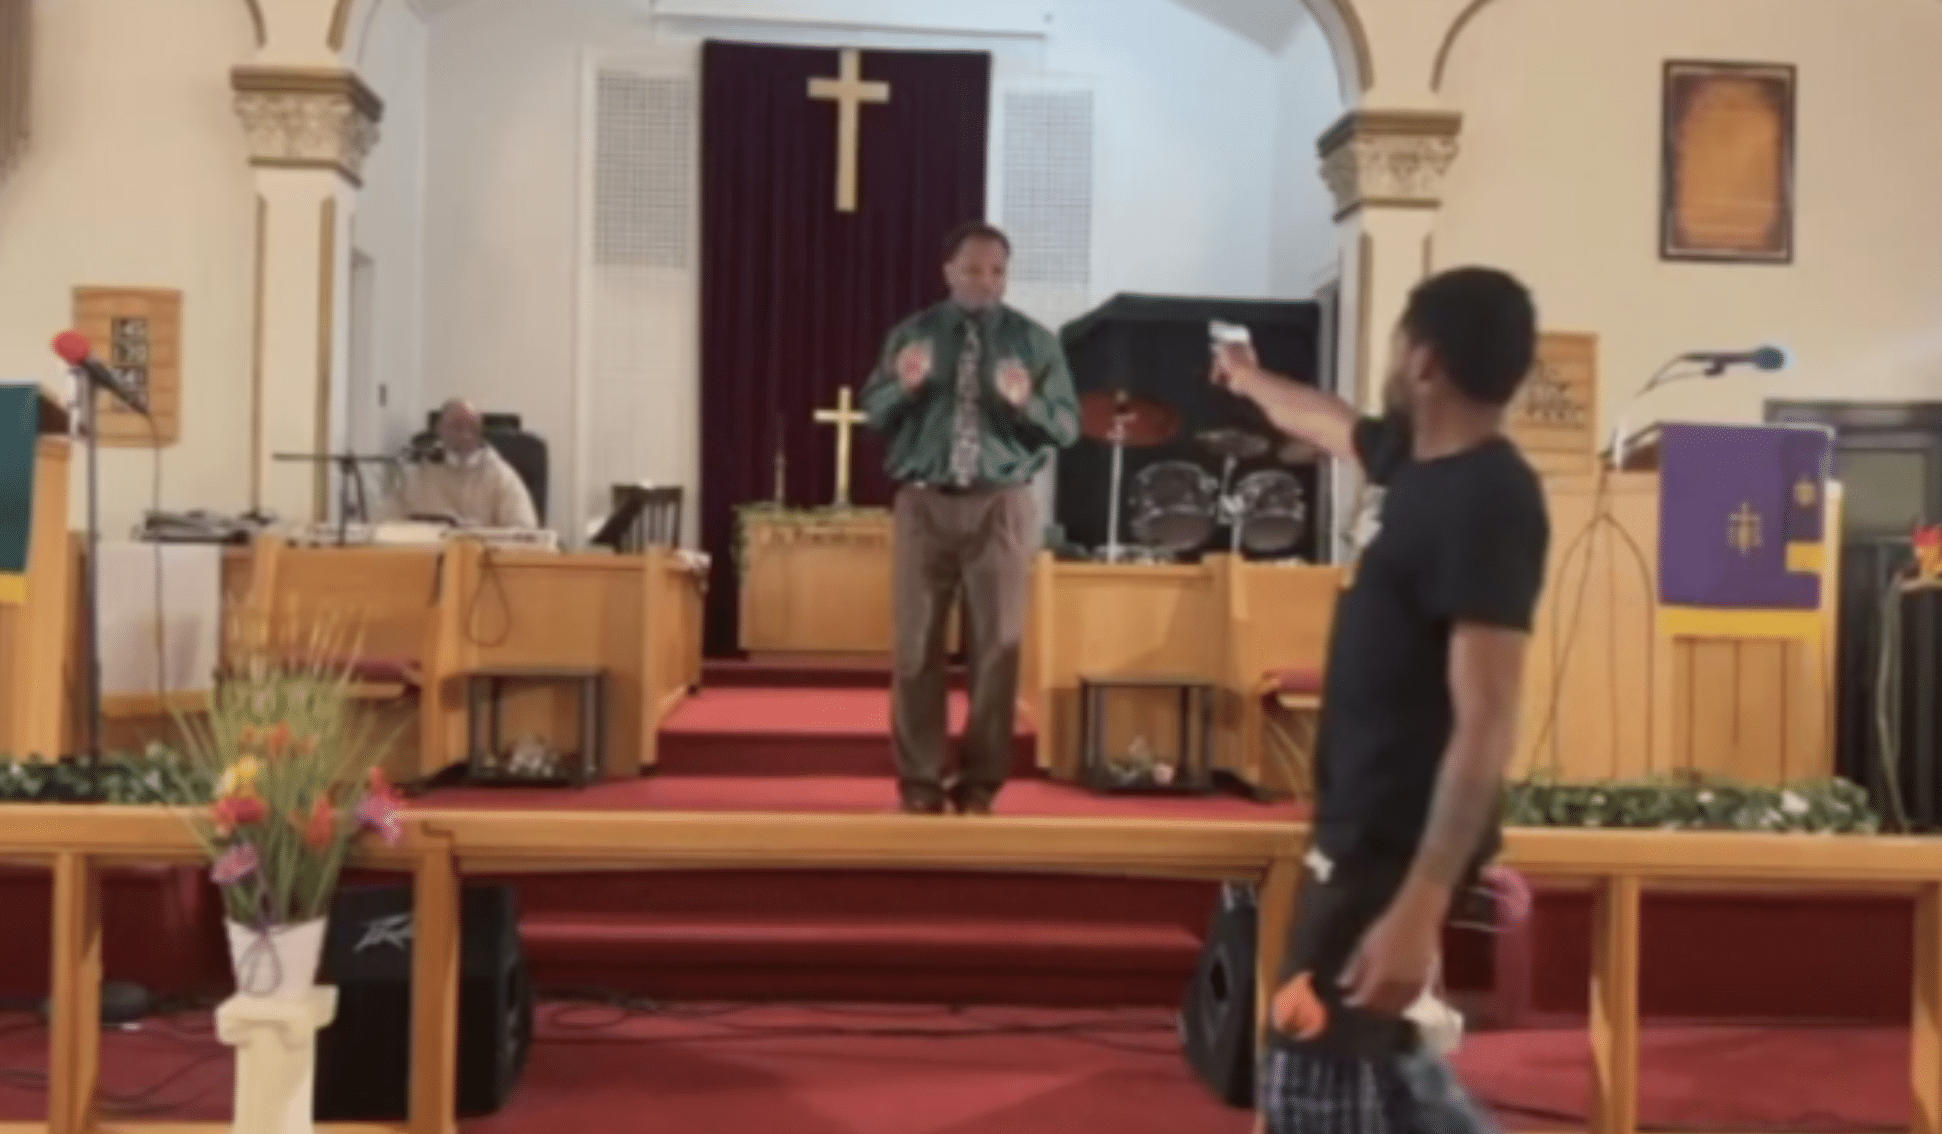 (WATCH) Man arrested, accused of trying to shoot pastor during sermon at Pennsylvania church